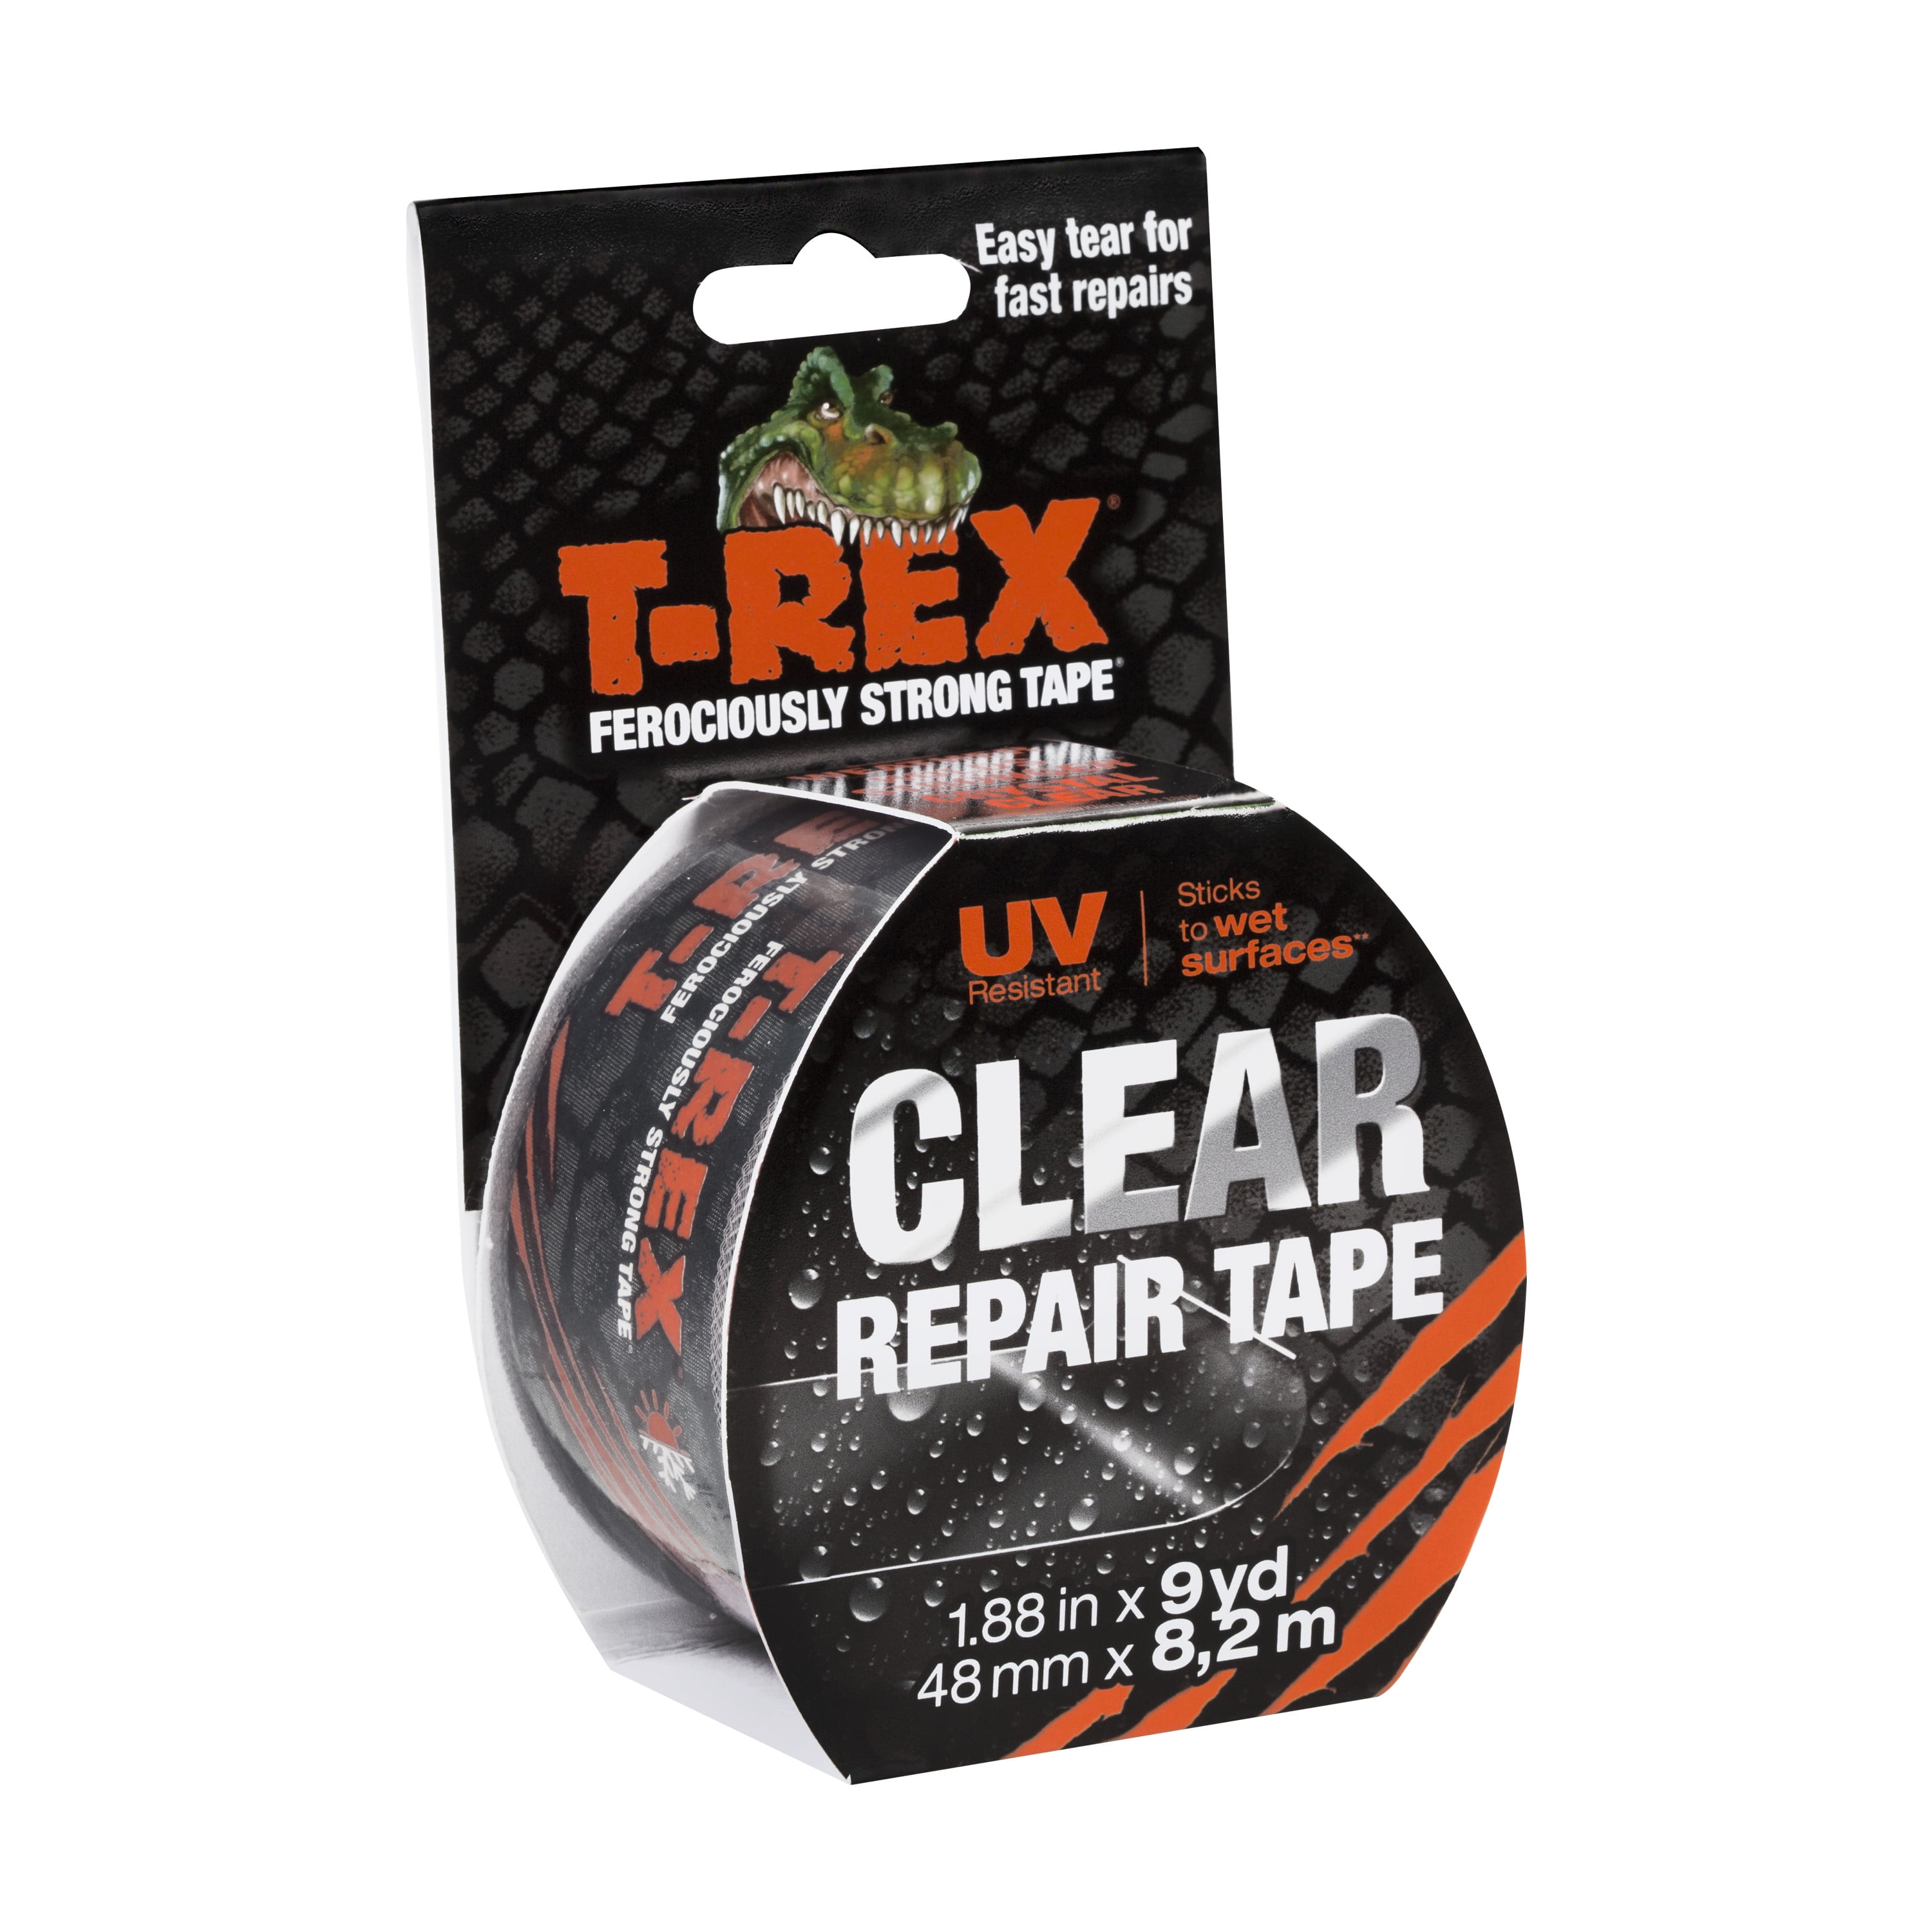 Gunmetal Gray Duct Tape T-Rex Ferociously Strong 1.88 in x 12 yd 